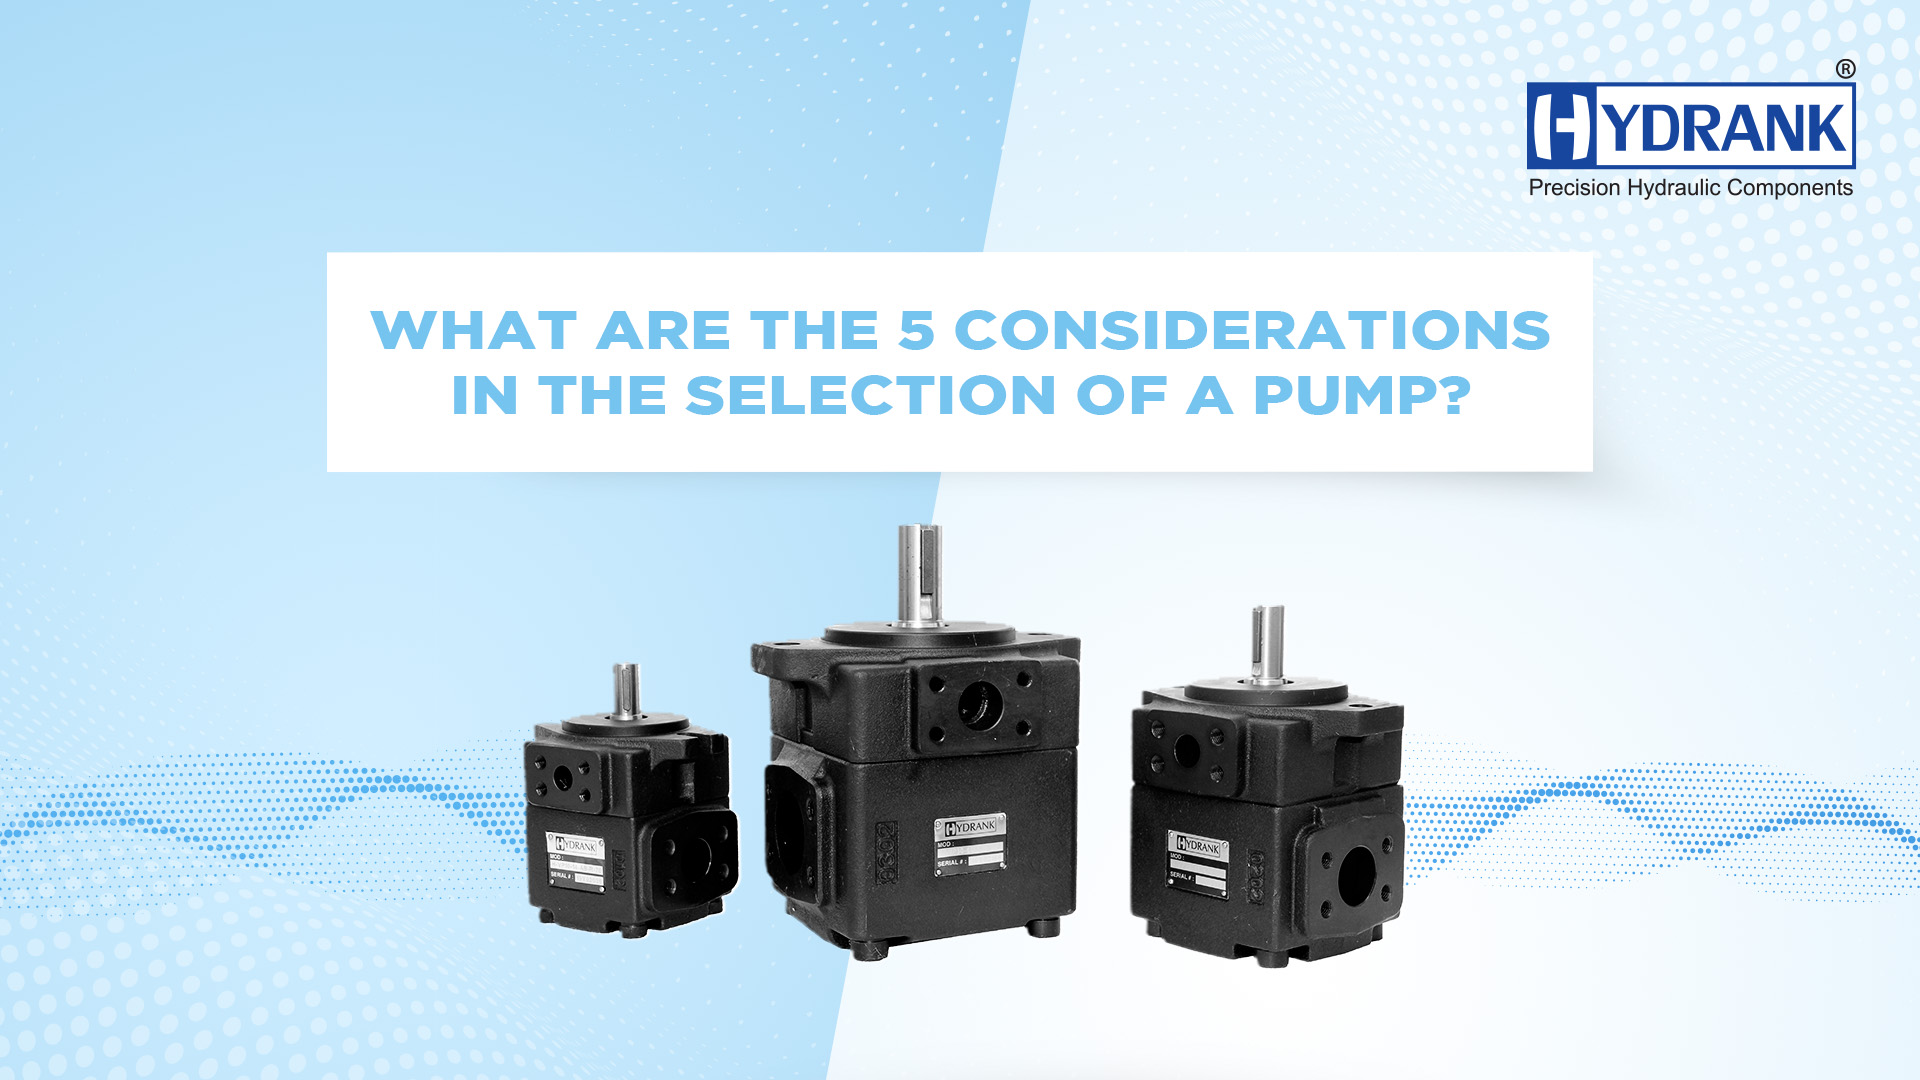 What are the 5 considerations in the selection of a pump?